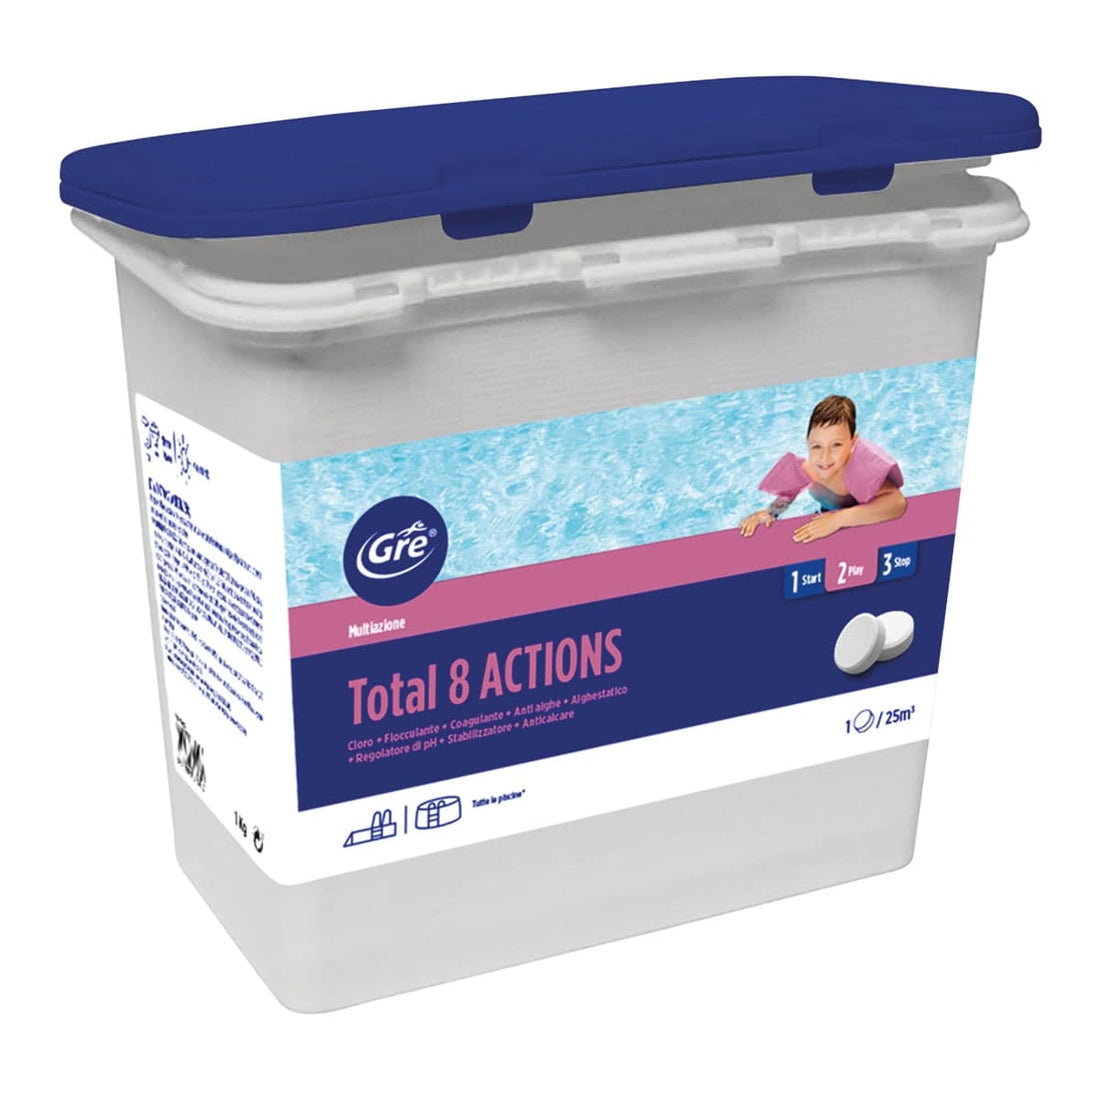 TREATMENT 8 ACTIONS 1KG, TABLETS 250G